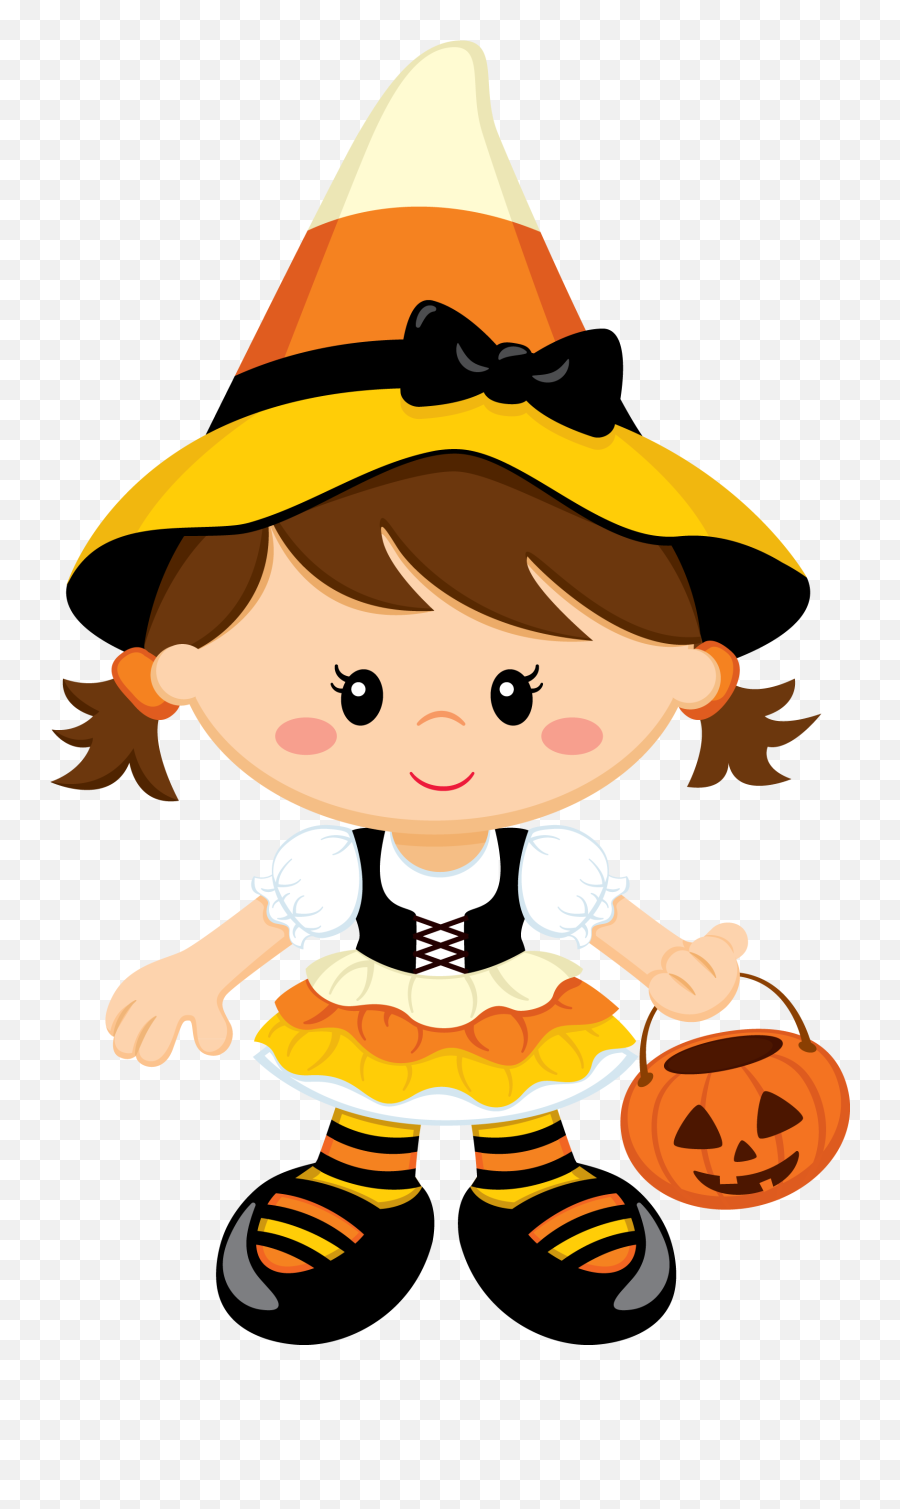 Witch Clipart Candy Corn Witch Candy Corn Transparent Free - Halloween Costumes Clipart Transparent Background Emoji,Candy Corn Clipart